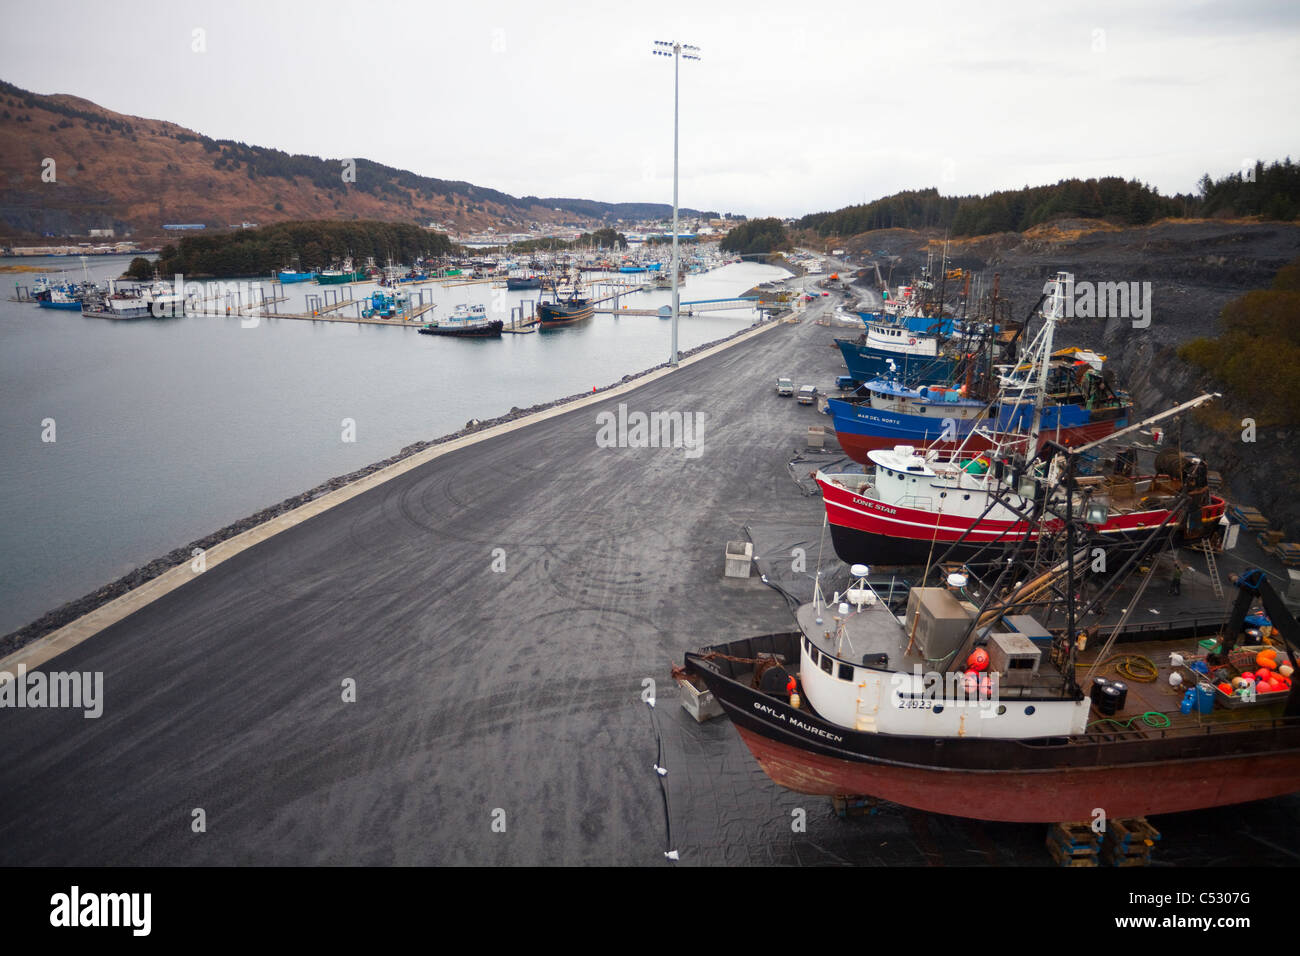 View of commercial fishing vessels hauled out in the Kodiak Boatyard for maintenance and repair, Kodiak, Alaska Stock Photo